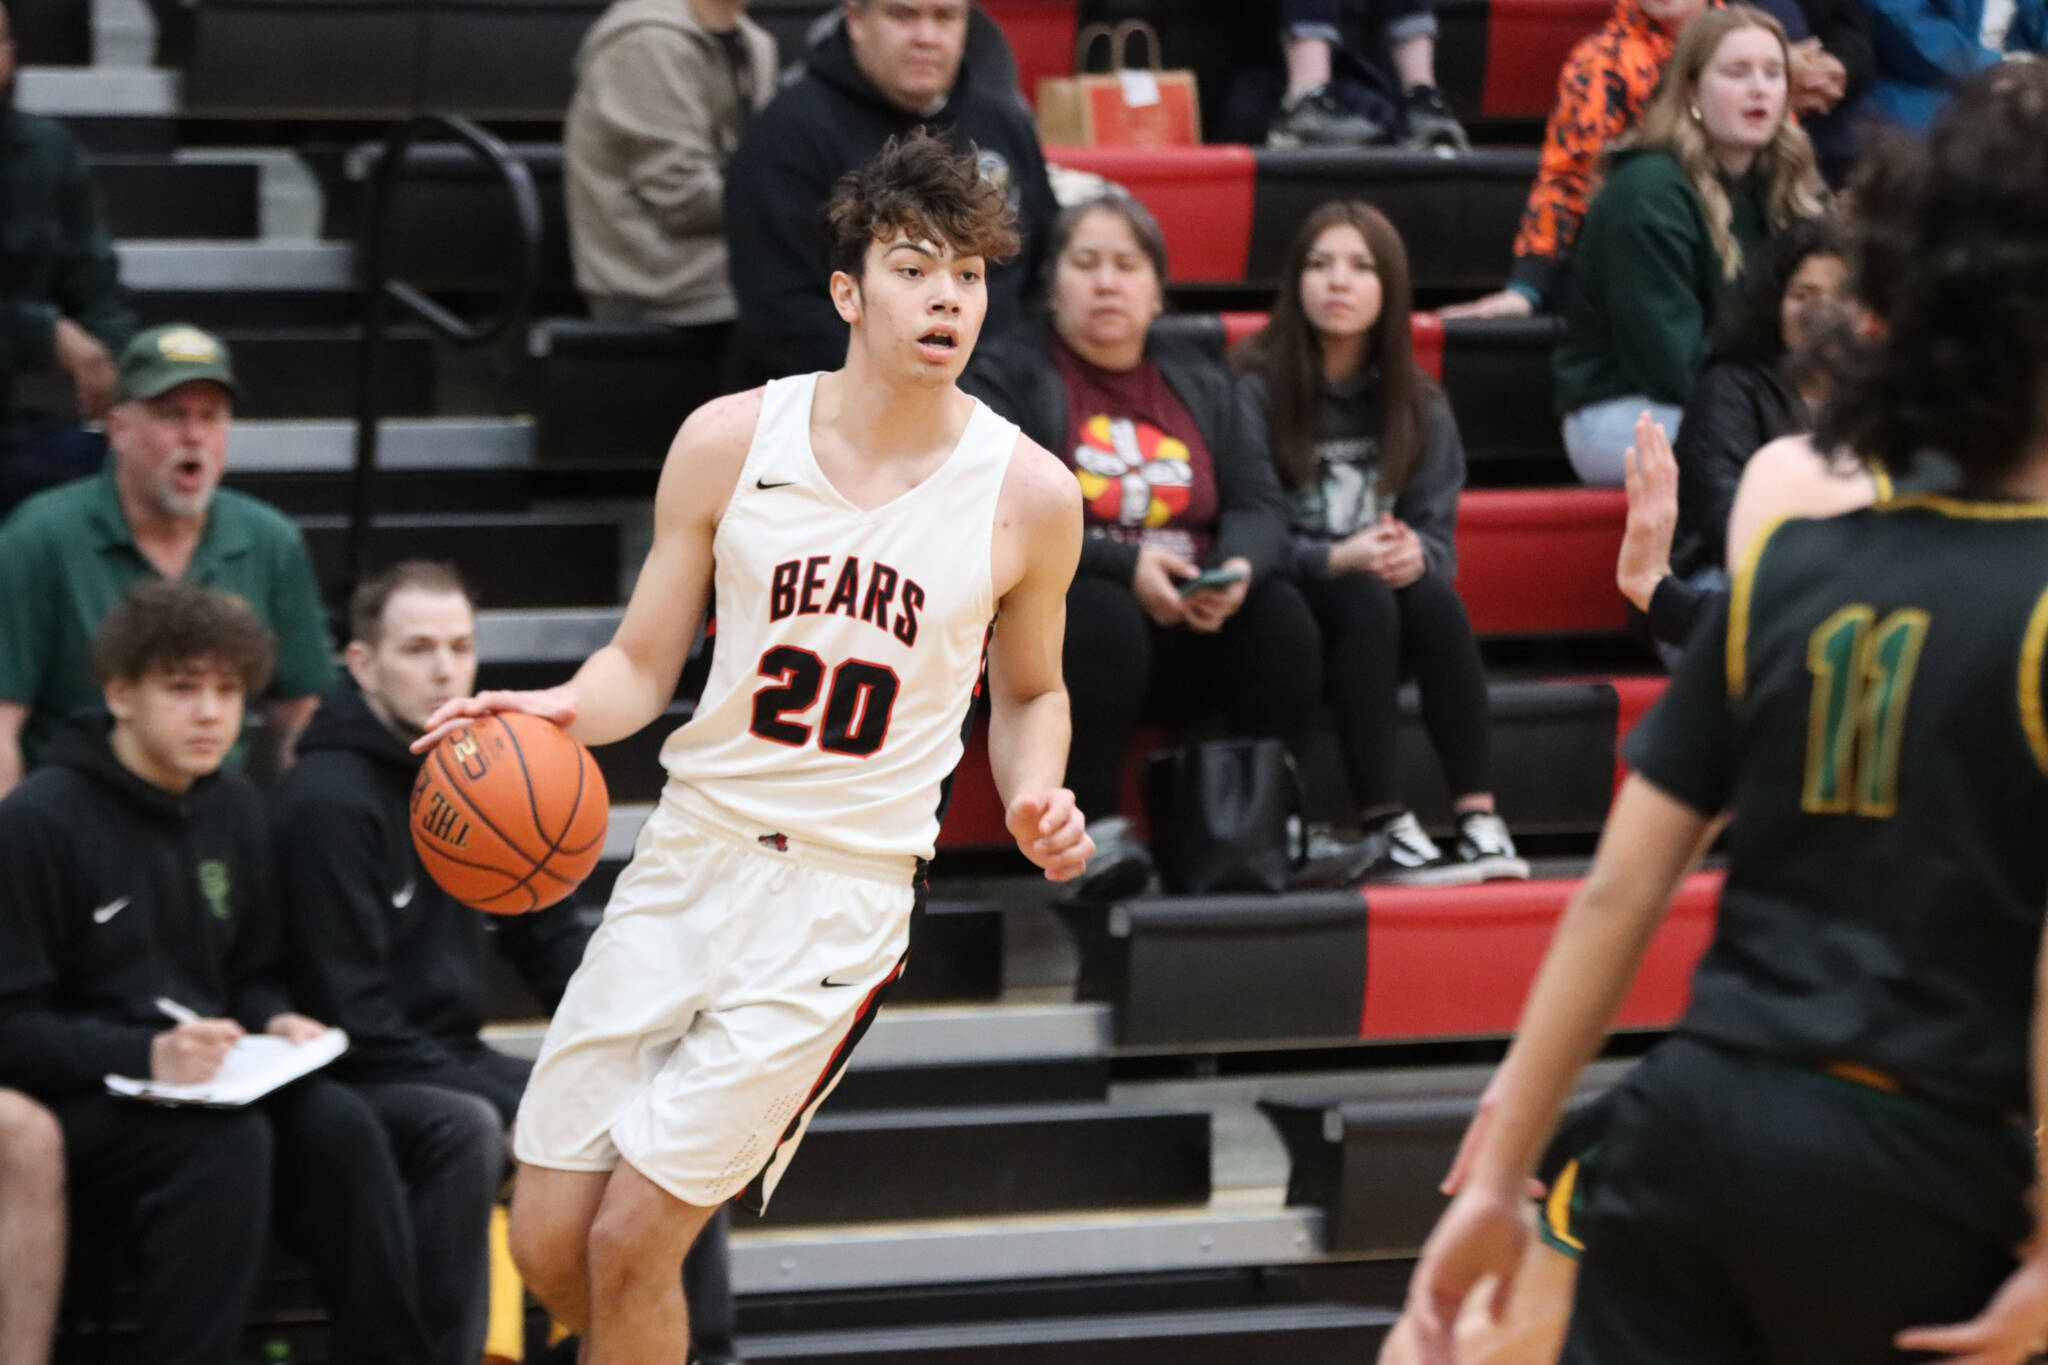 JDHS senior forward Orion Dybdahl looks to take a shot against Service High School on Wednesday night. Dybdahl led the Crimson Bears in scores with a total of 16 points in game one of two against Service. (Jonson Kuhn / Juneau Empire)